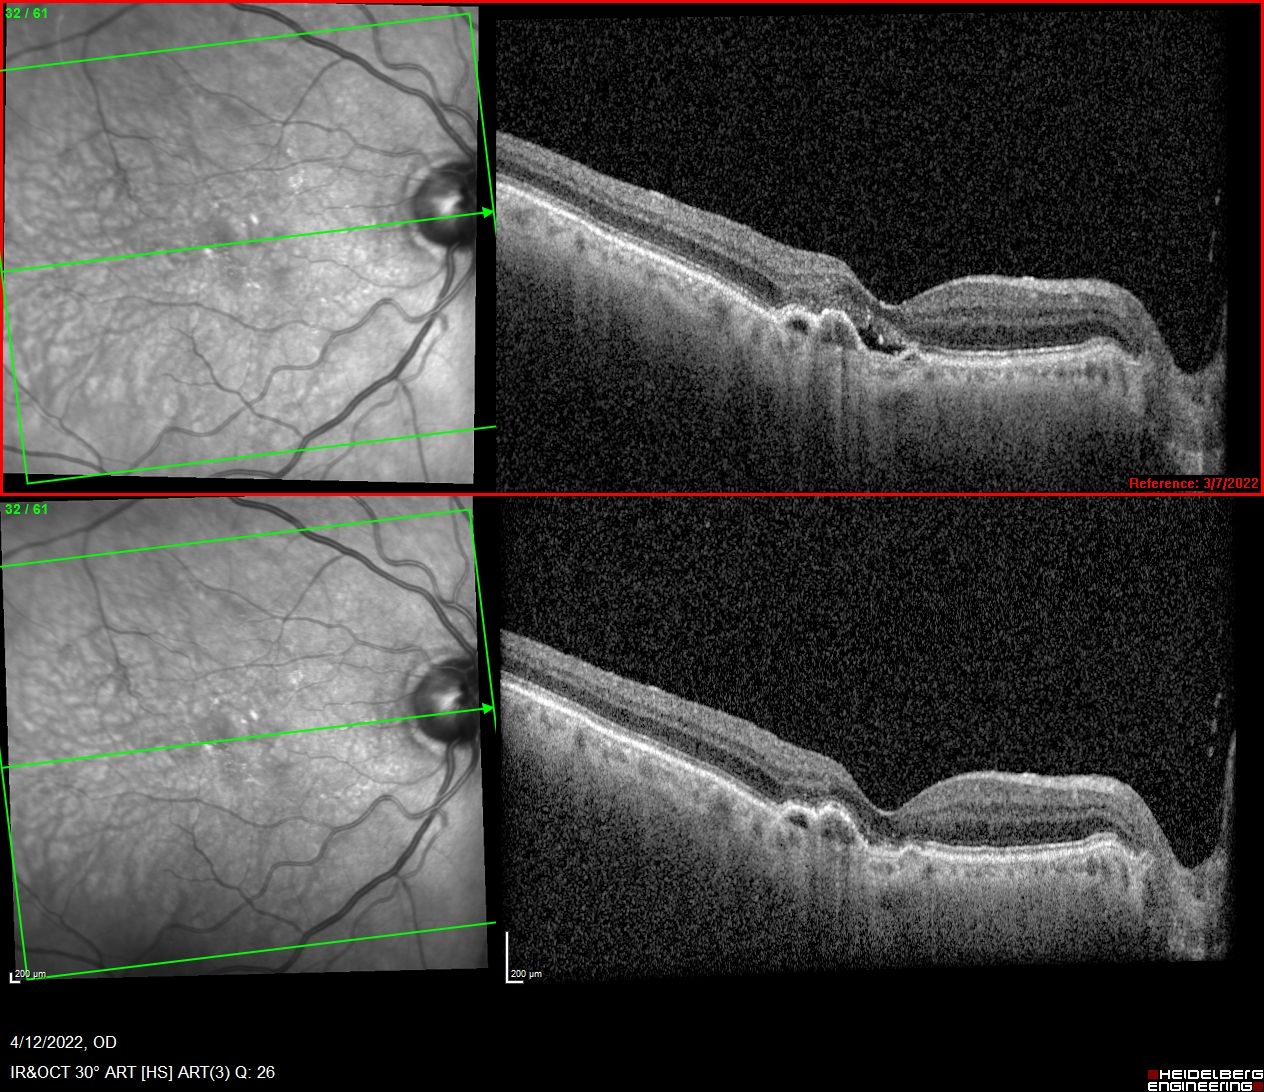 This patient began treatment in 2013, receiving monthly treatment for years and even enrolling in the Merlin study. Vision fluctuates somewhat over the years. The patient recently switched to faricimab (Vabysmo, Genentech), and the imaging shows resolution of fluid while vision was maintained. (Images courtesy of Carl Danzig, MD)